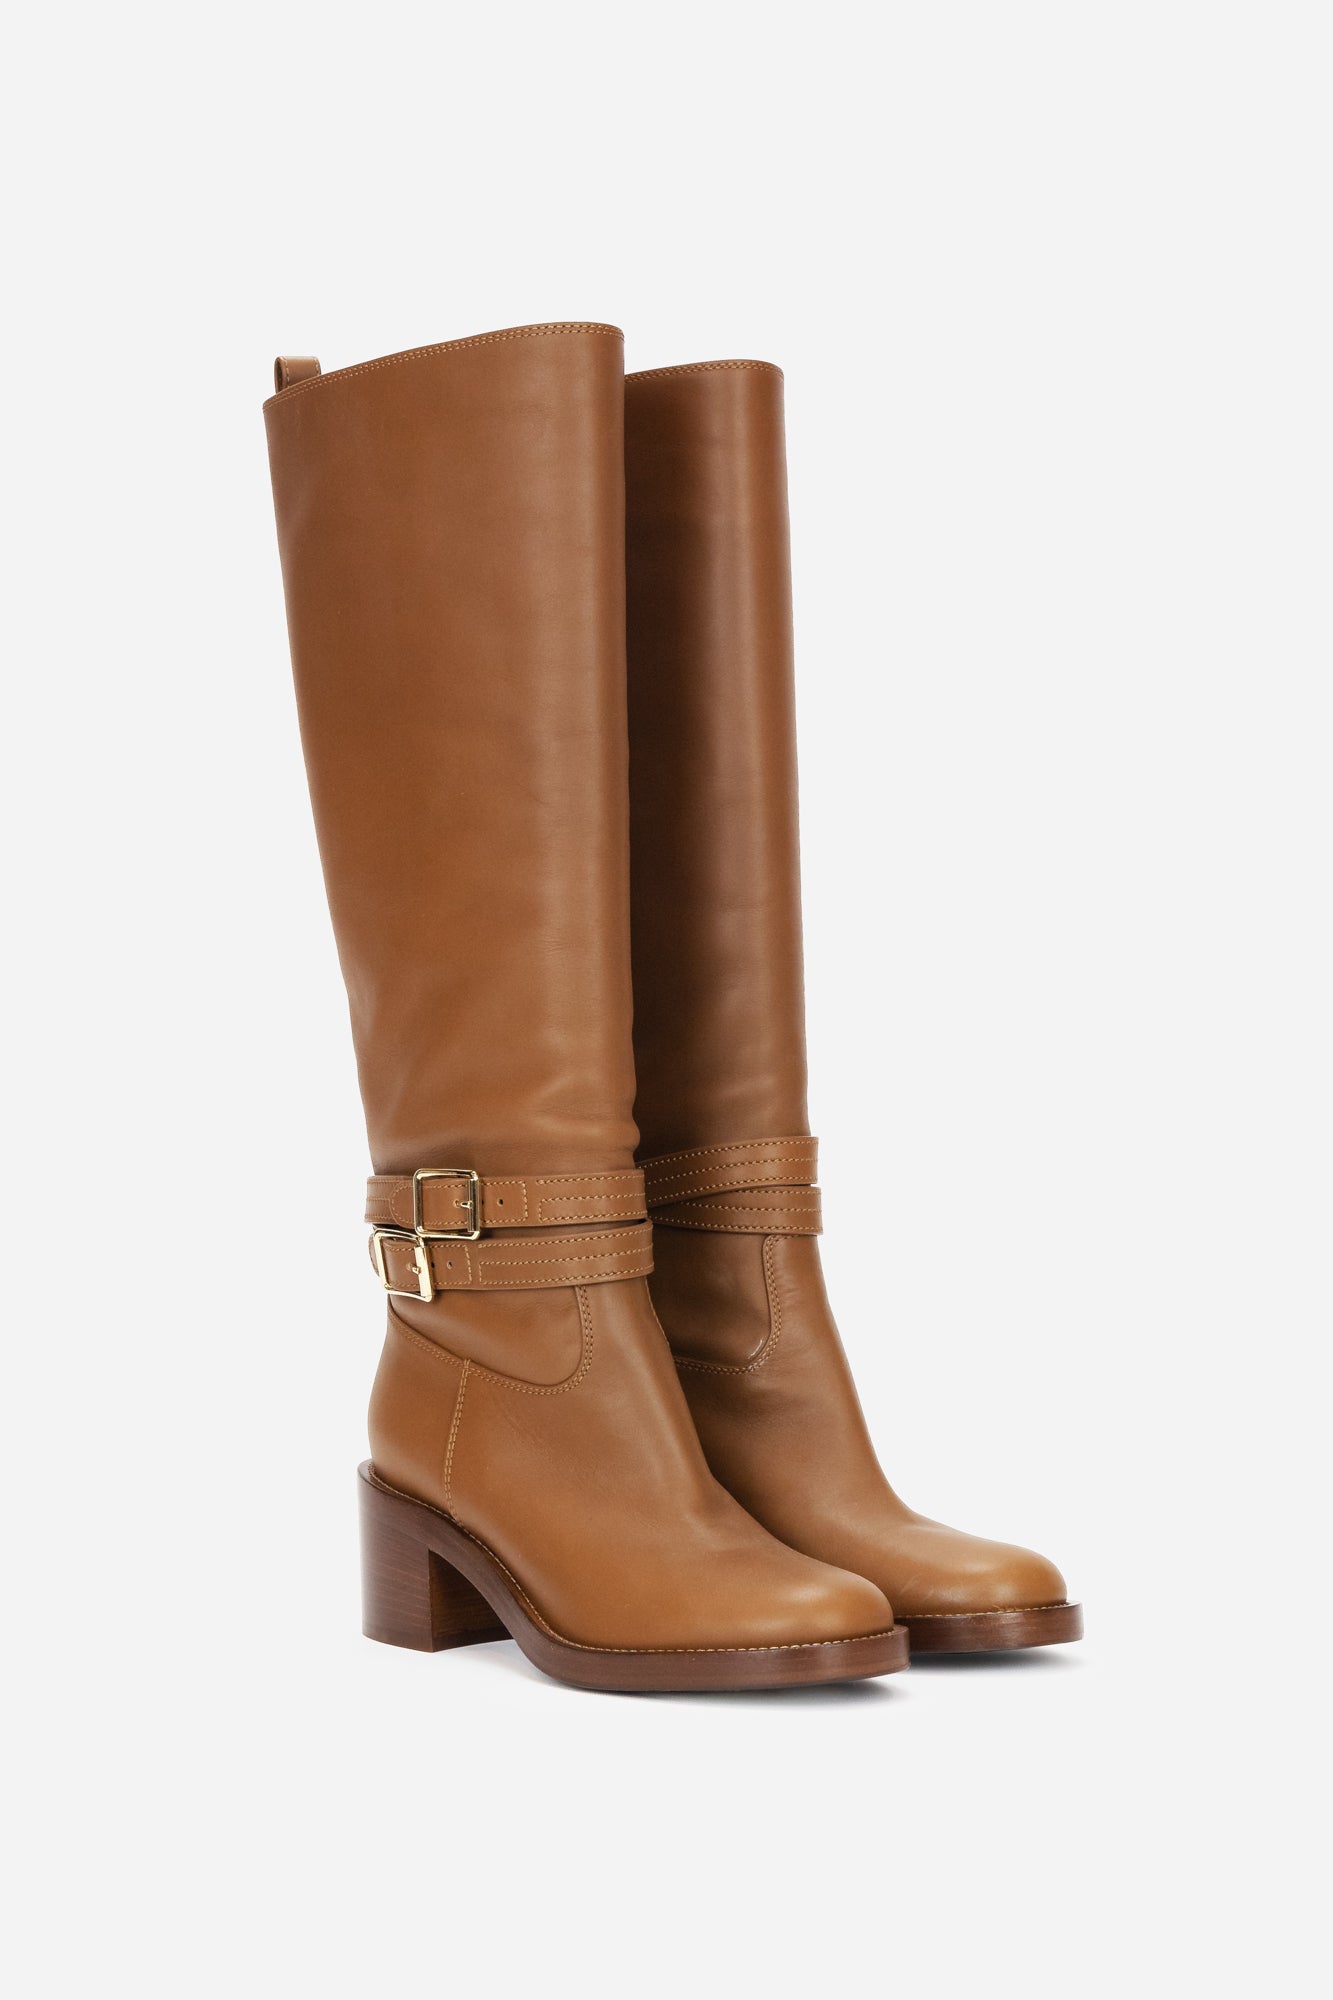 Brown Leather Riding Boots with Buckle Details